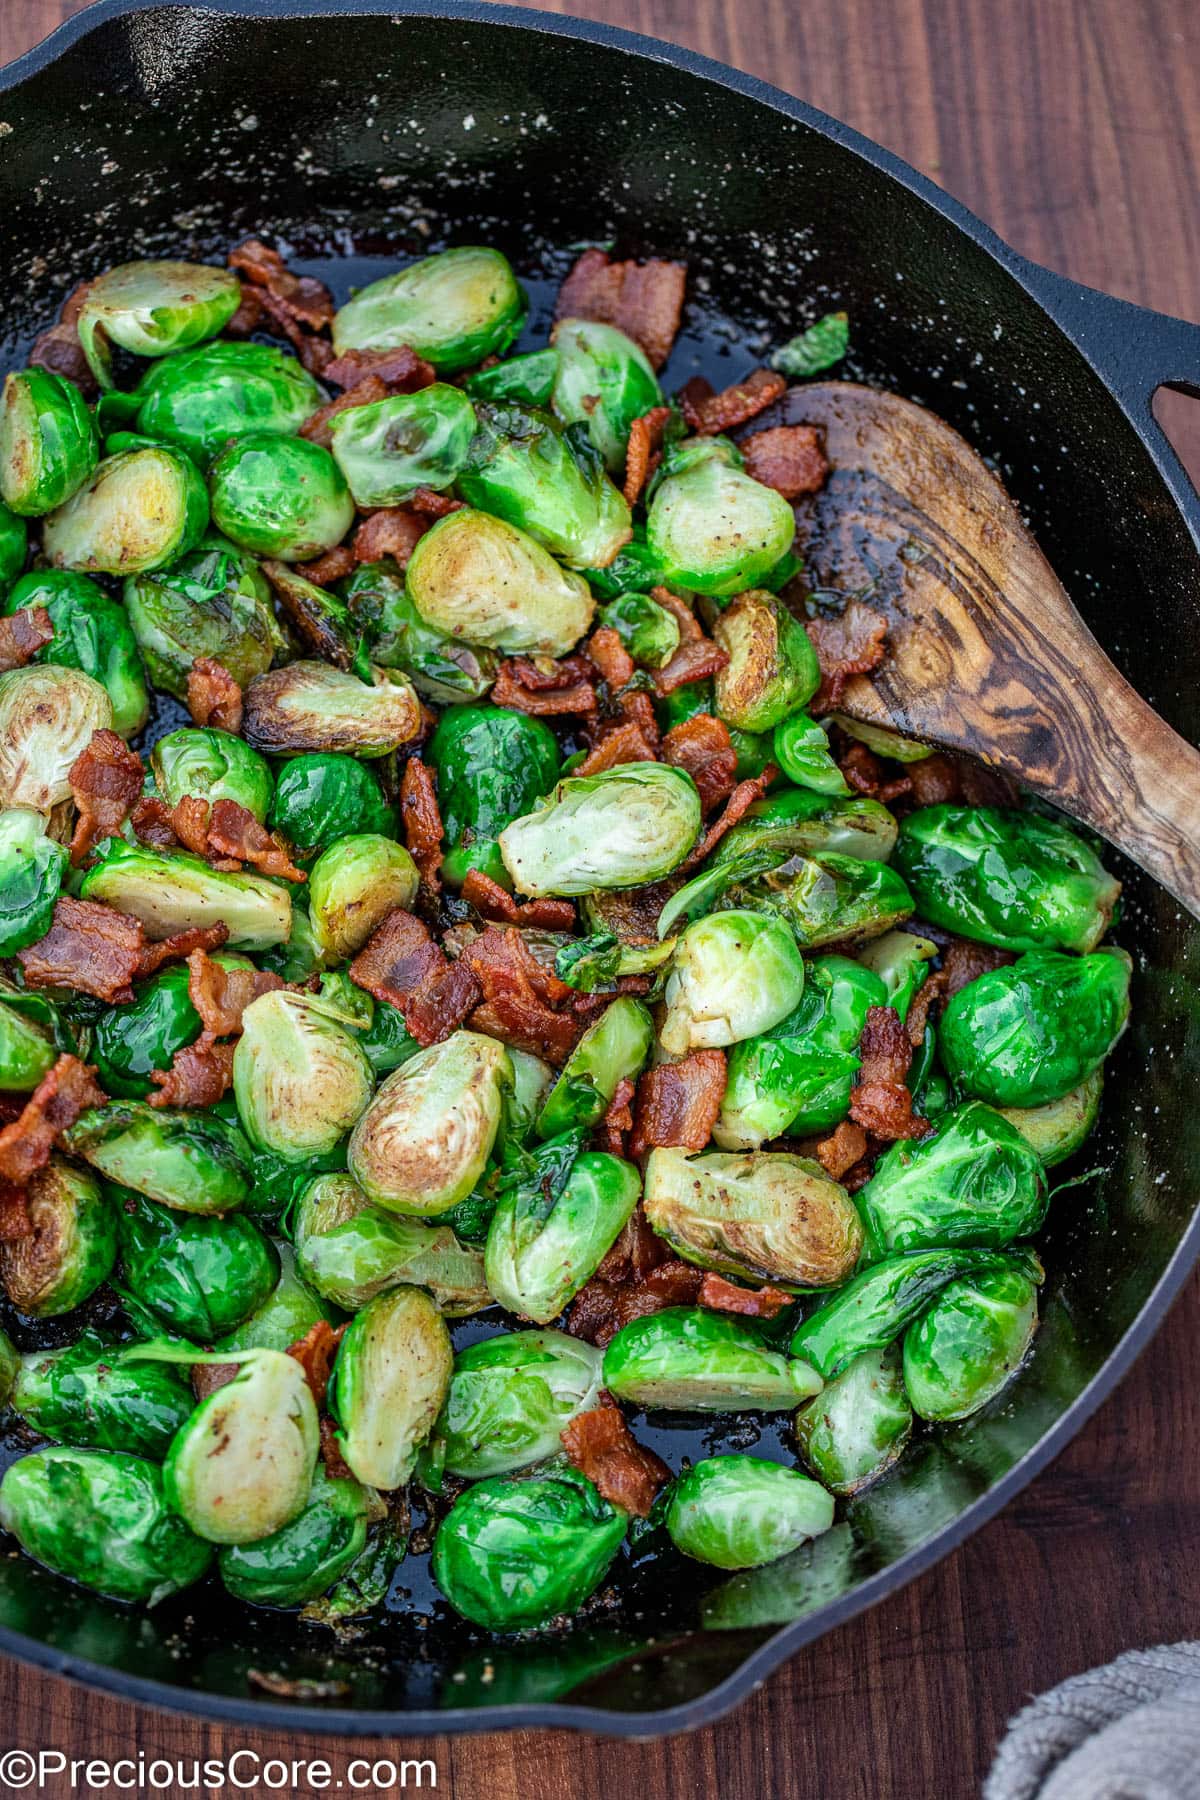 Pan-fried Brussels sprouts with bacon in a black skillet.